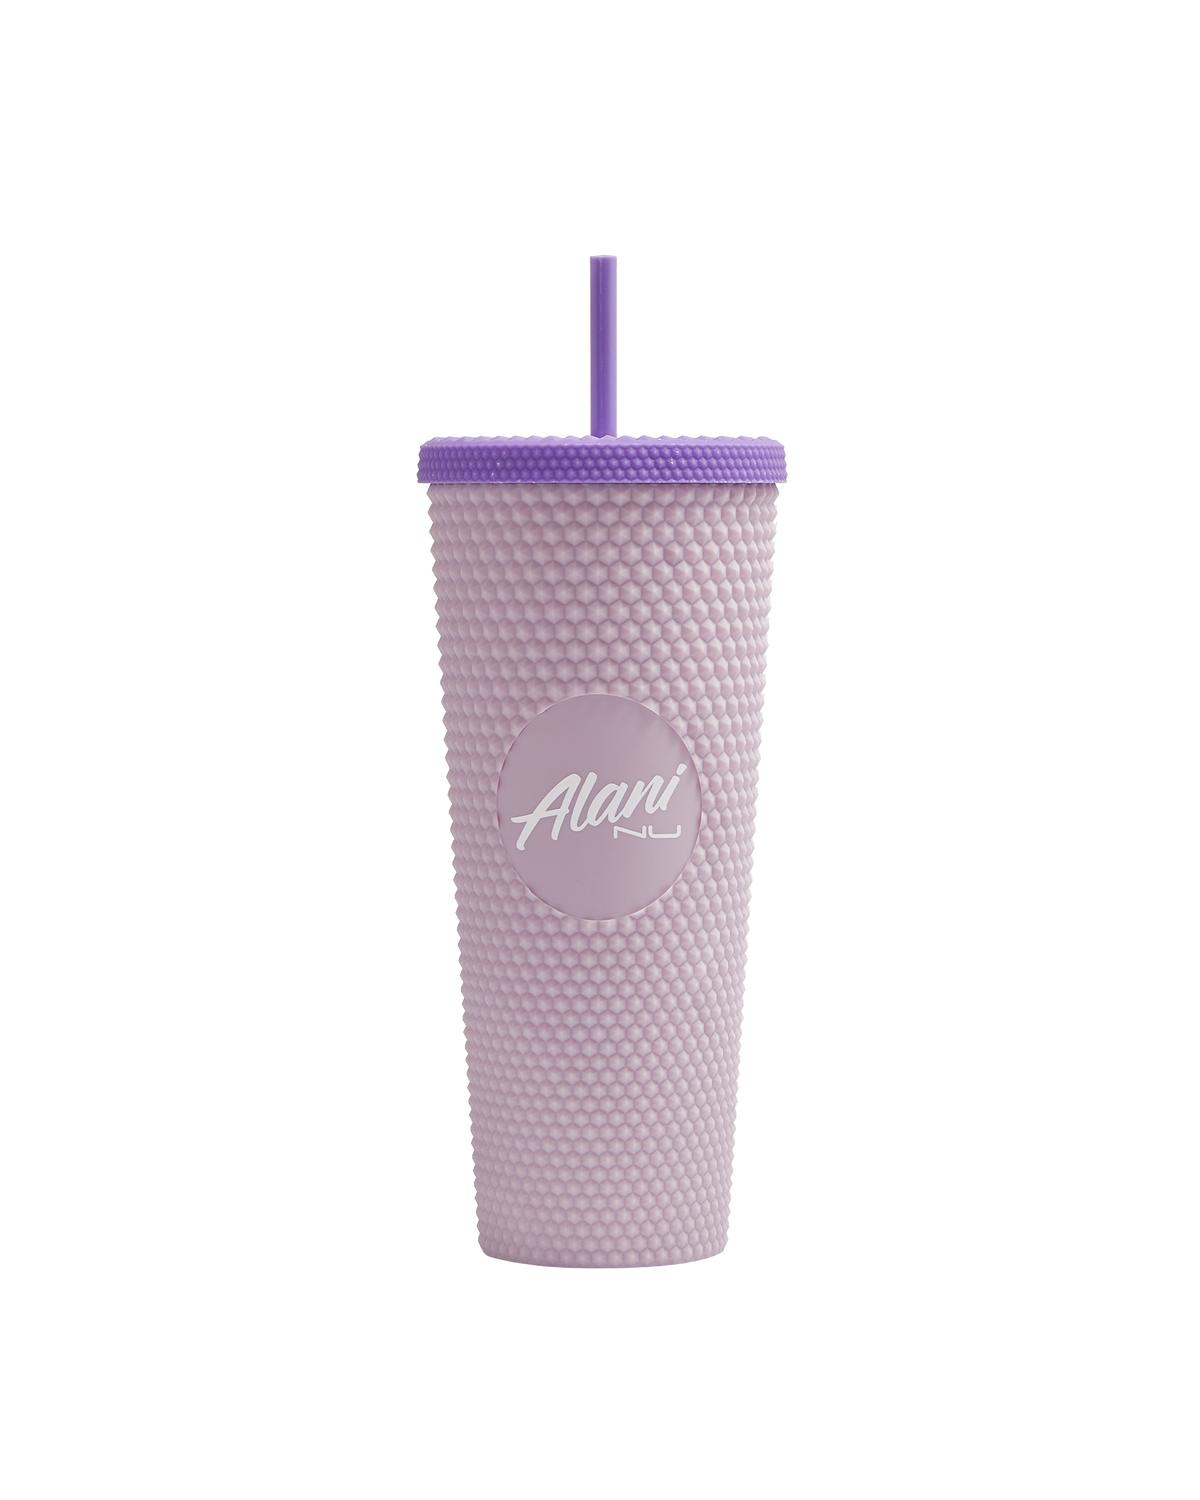 A 24oz Tumbler in Periwinkle Ombre'.